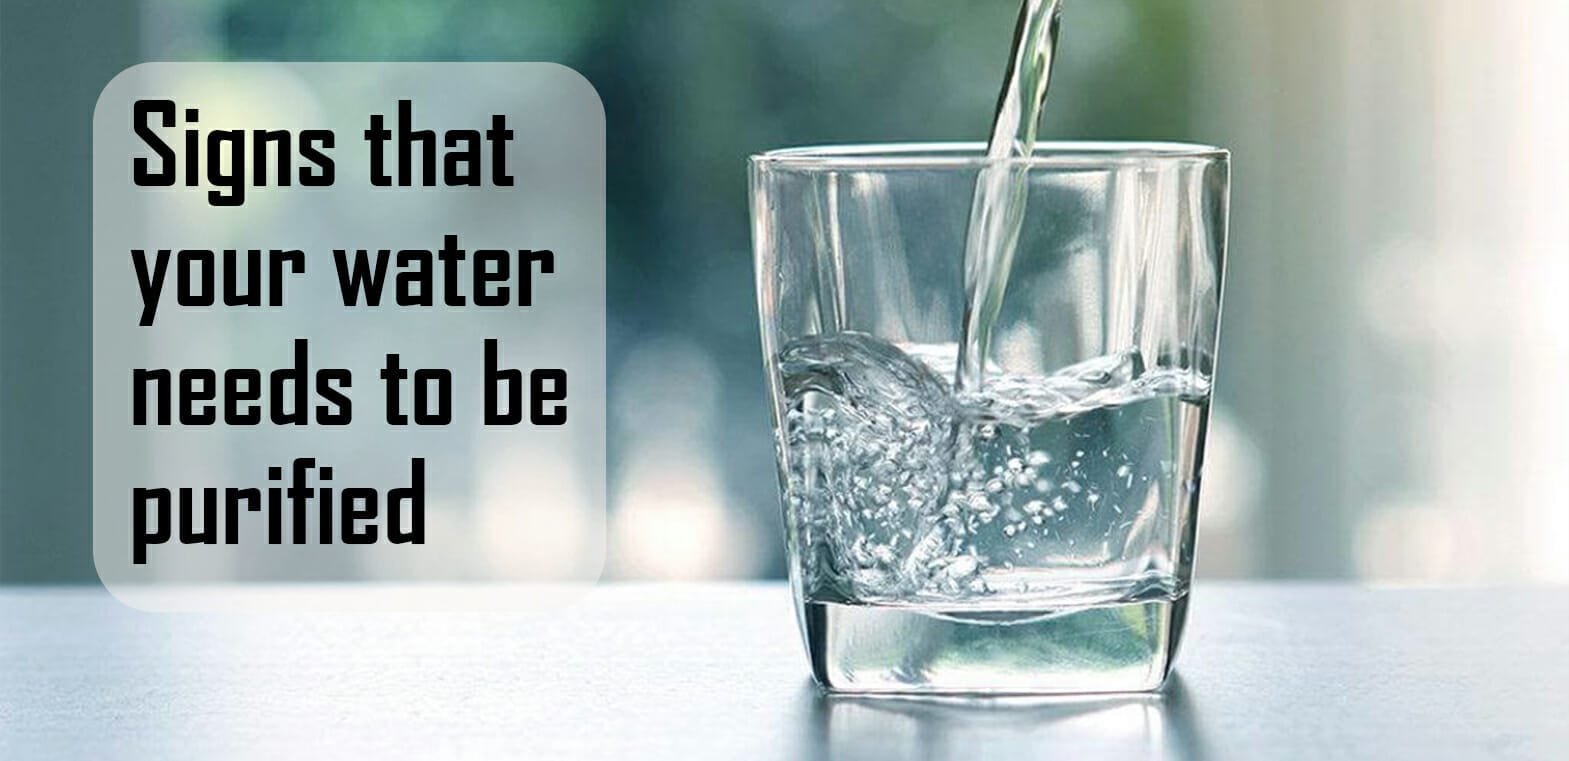 signs that your water needs to be purified